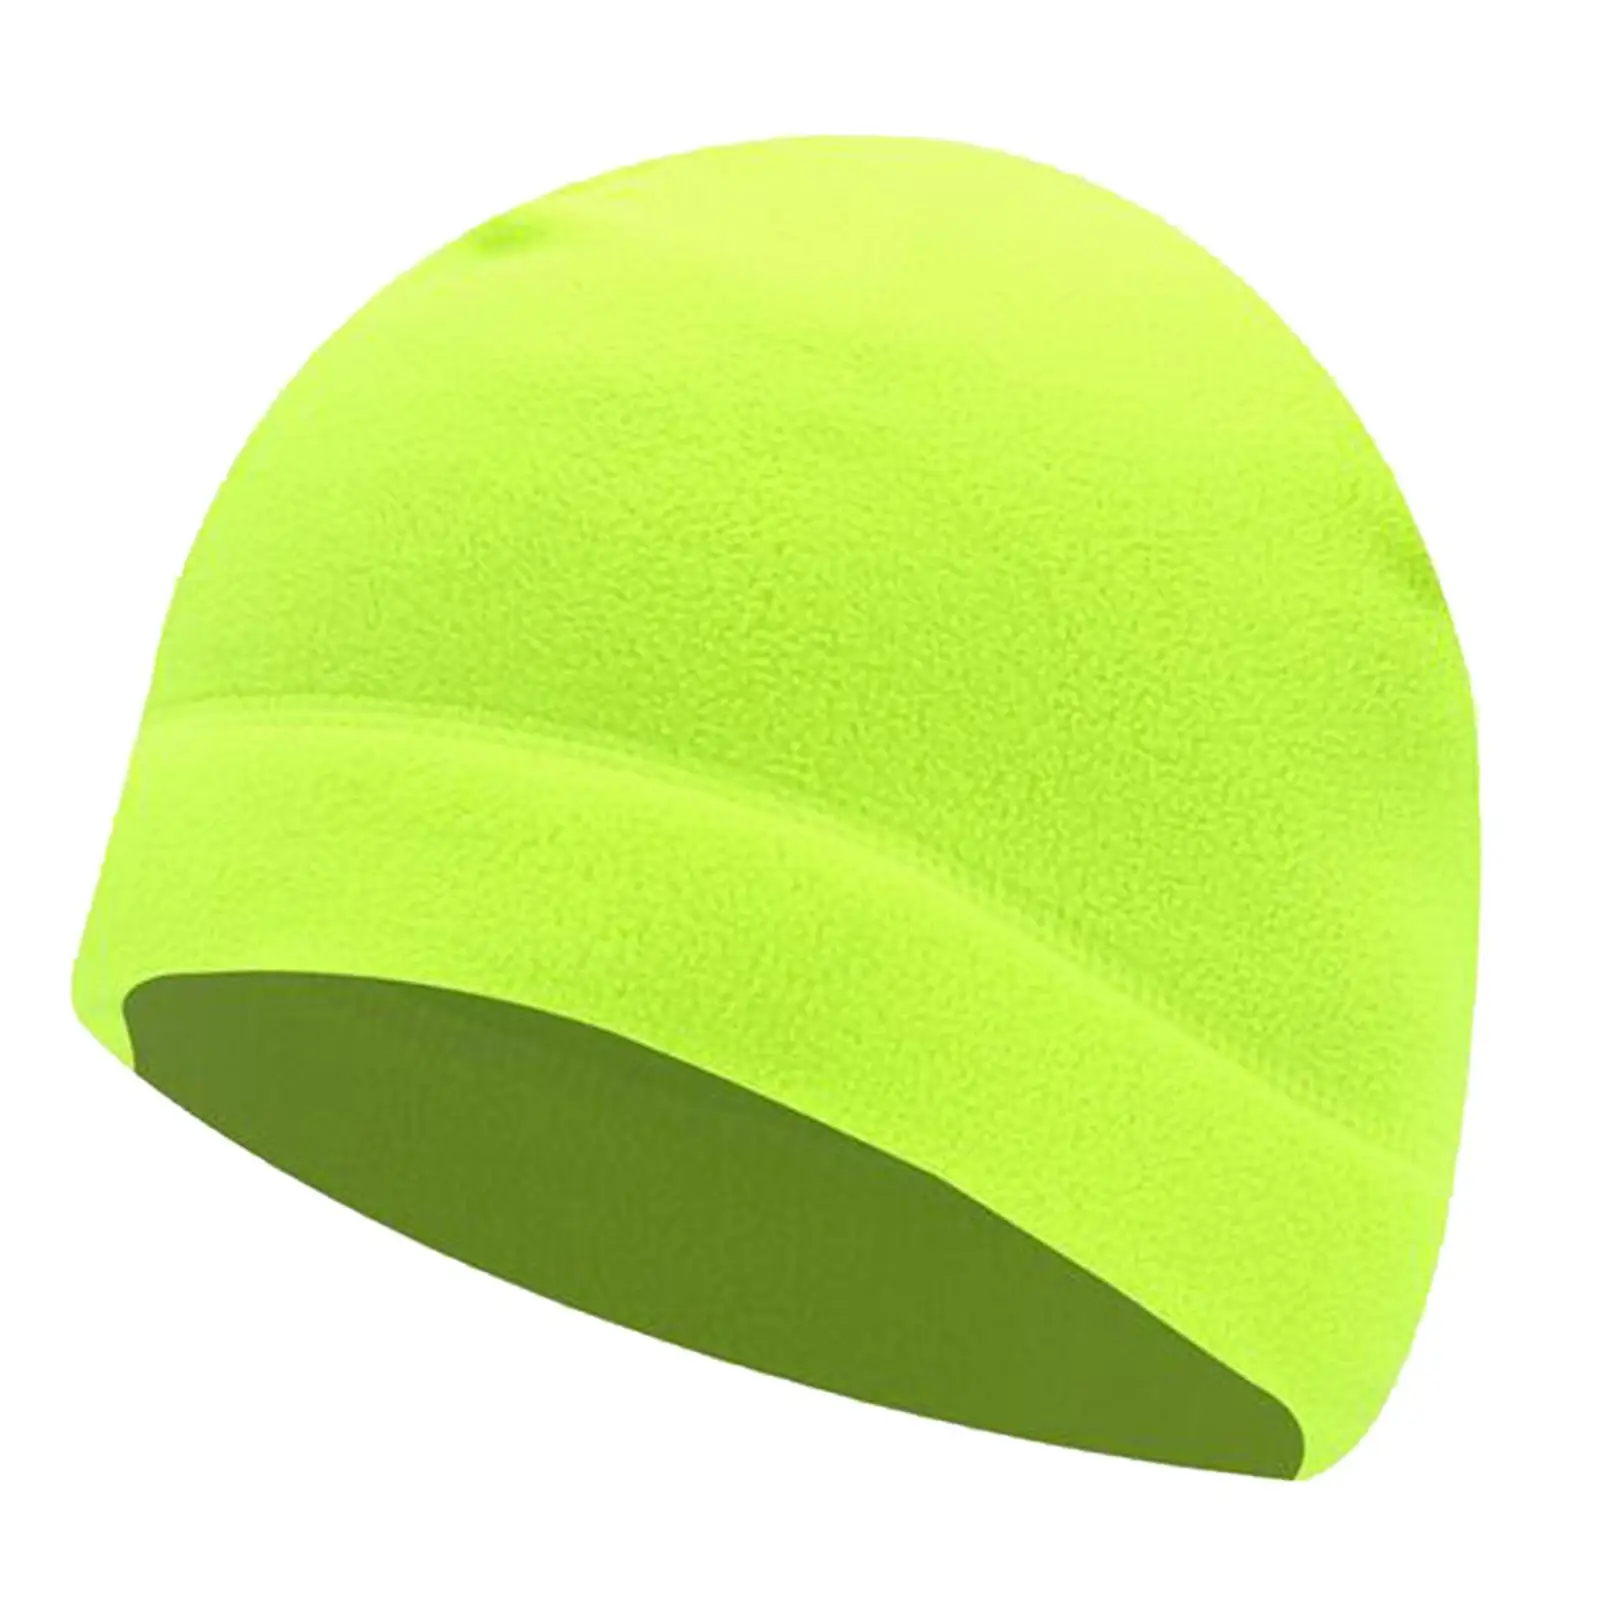 Skull Hat Hats Lightweight Ears Cover Beanie for Skiing Basketball Hiking